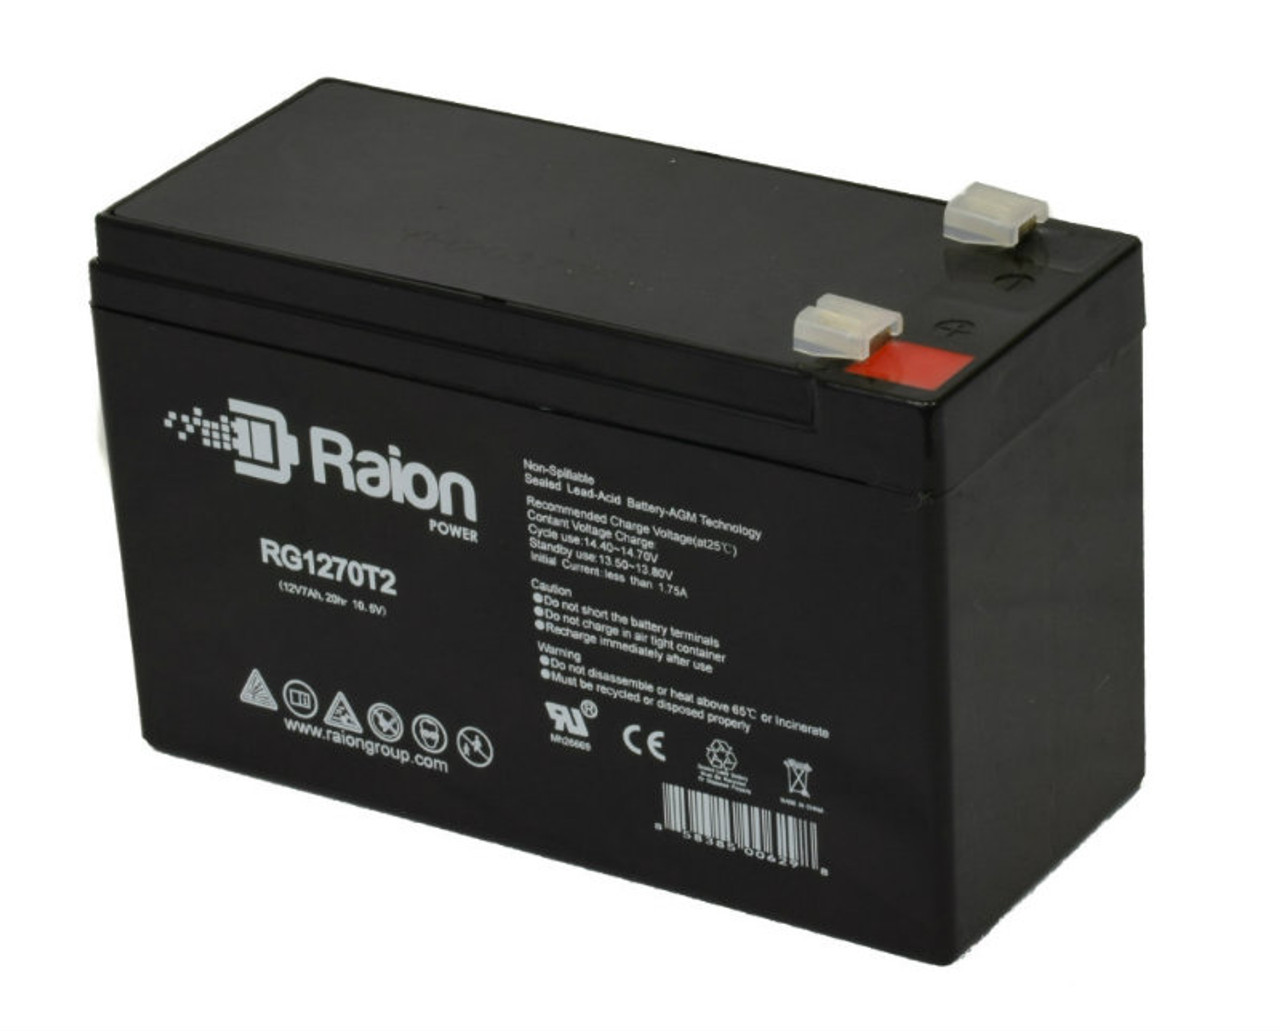 Raion Power RG1270T1 12V 7Ah Non-Spillable Replacement Battery for Alarmtec BP7-12 F1